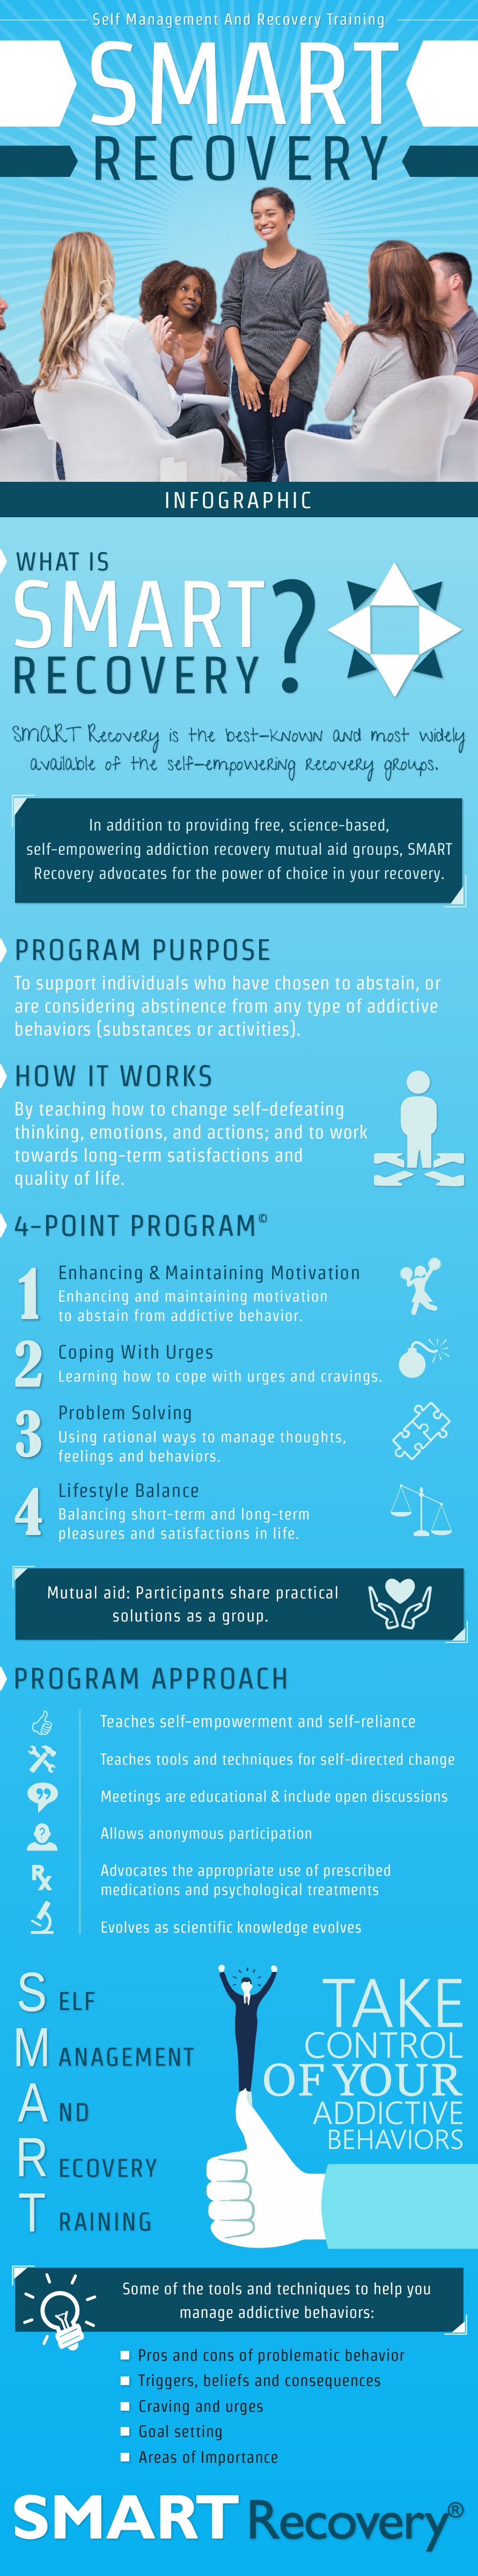 SMART Recovery Infographic